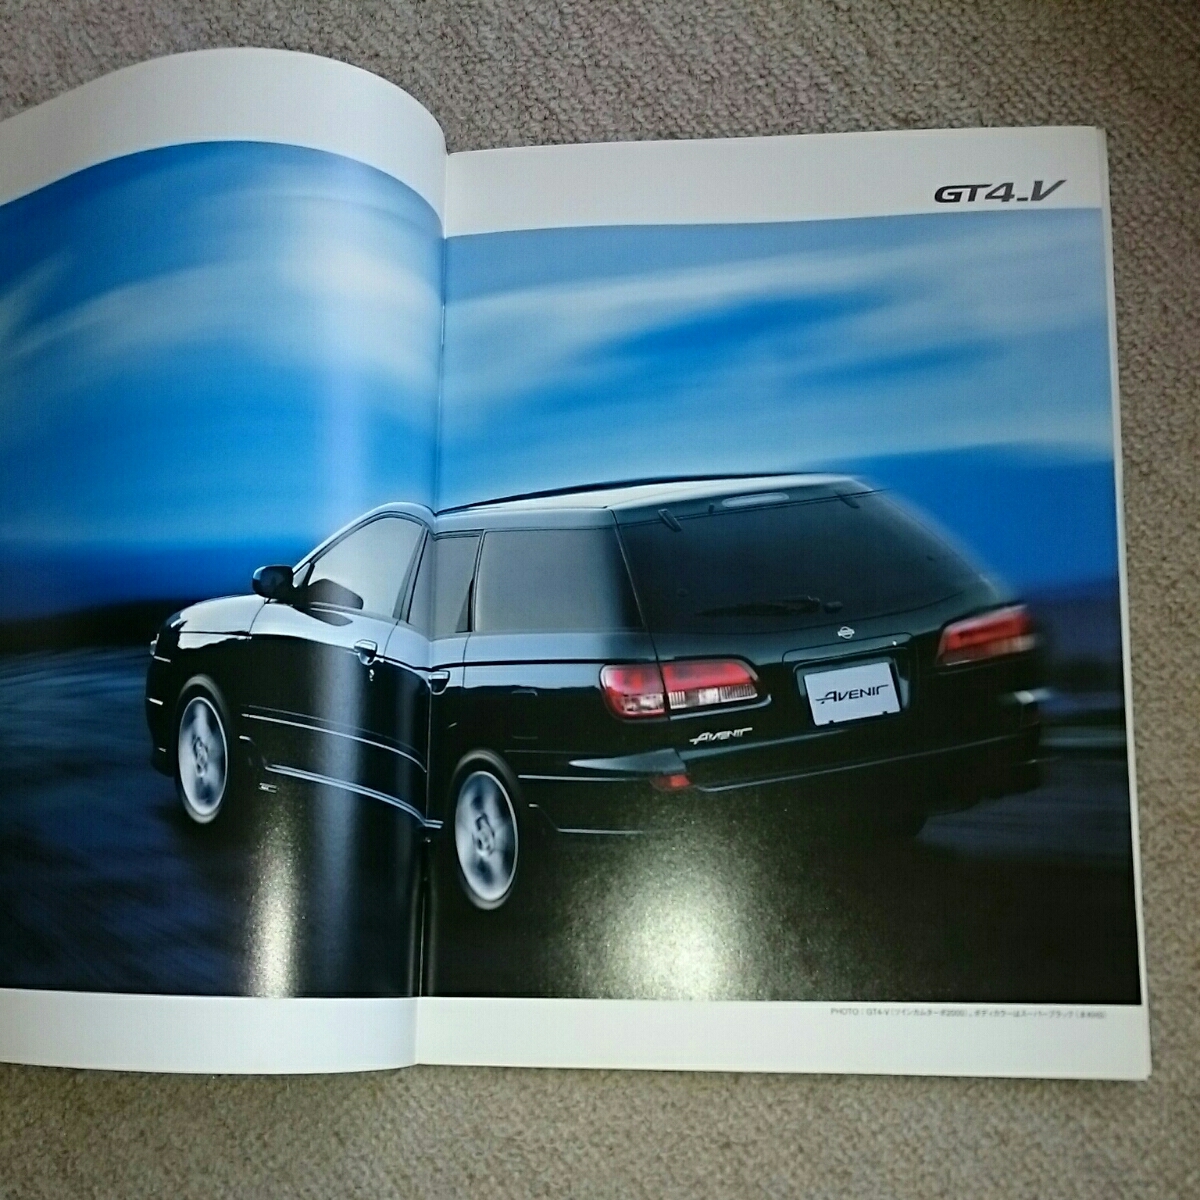  records out of production,2000 year 5 month issue, model GF-PNW11,PW11,TA-W11. Nissan Avenir Station Wagon.GT4-V,GT4-Si other.SR20DET,SR20DE engine.